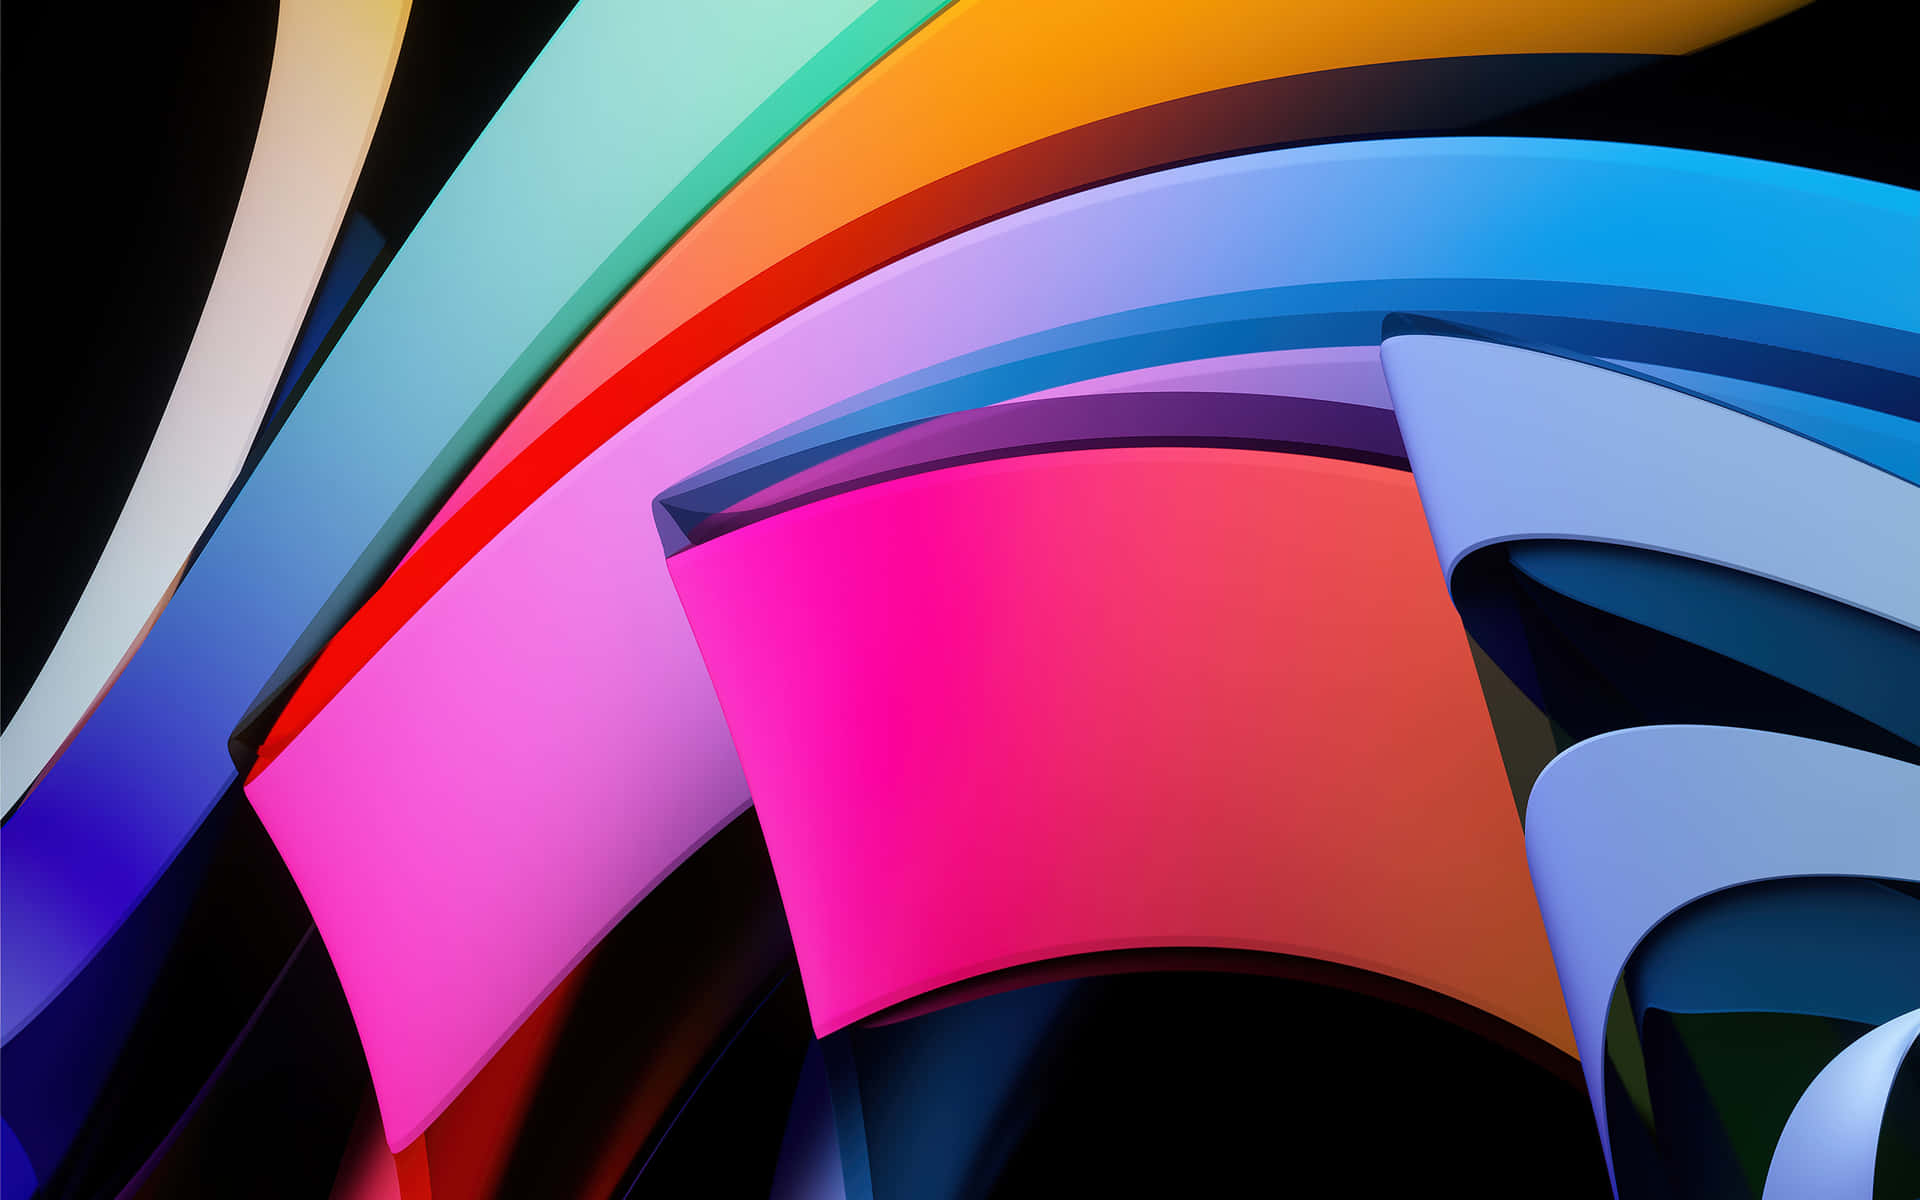 Enjoy the lively gradients of Color Block